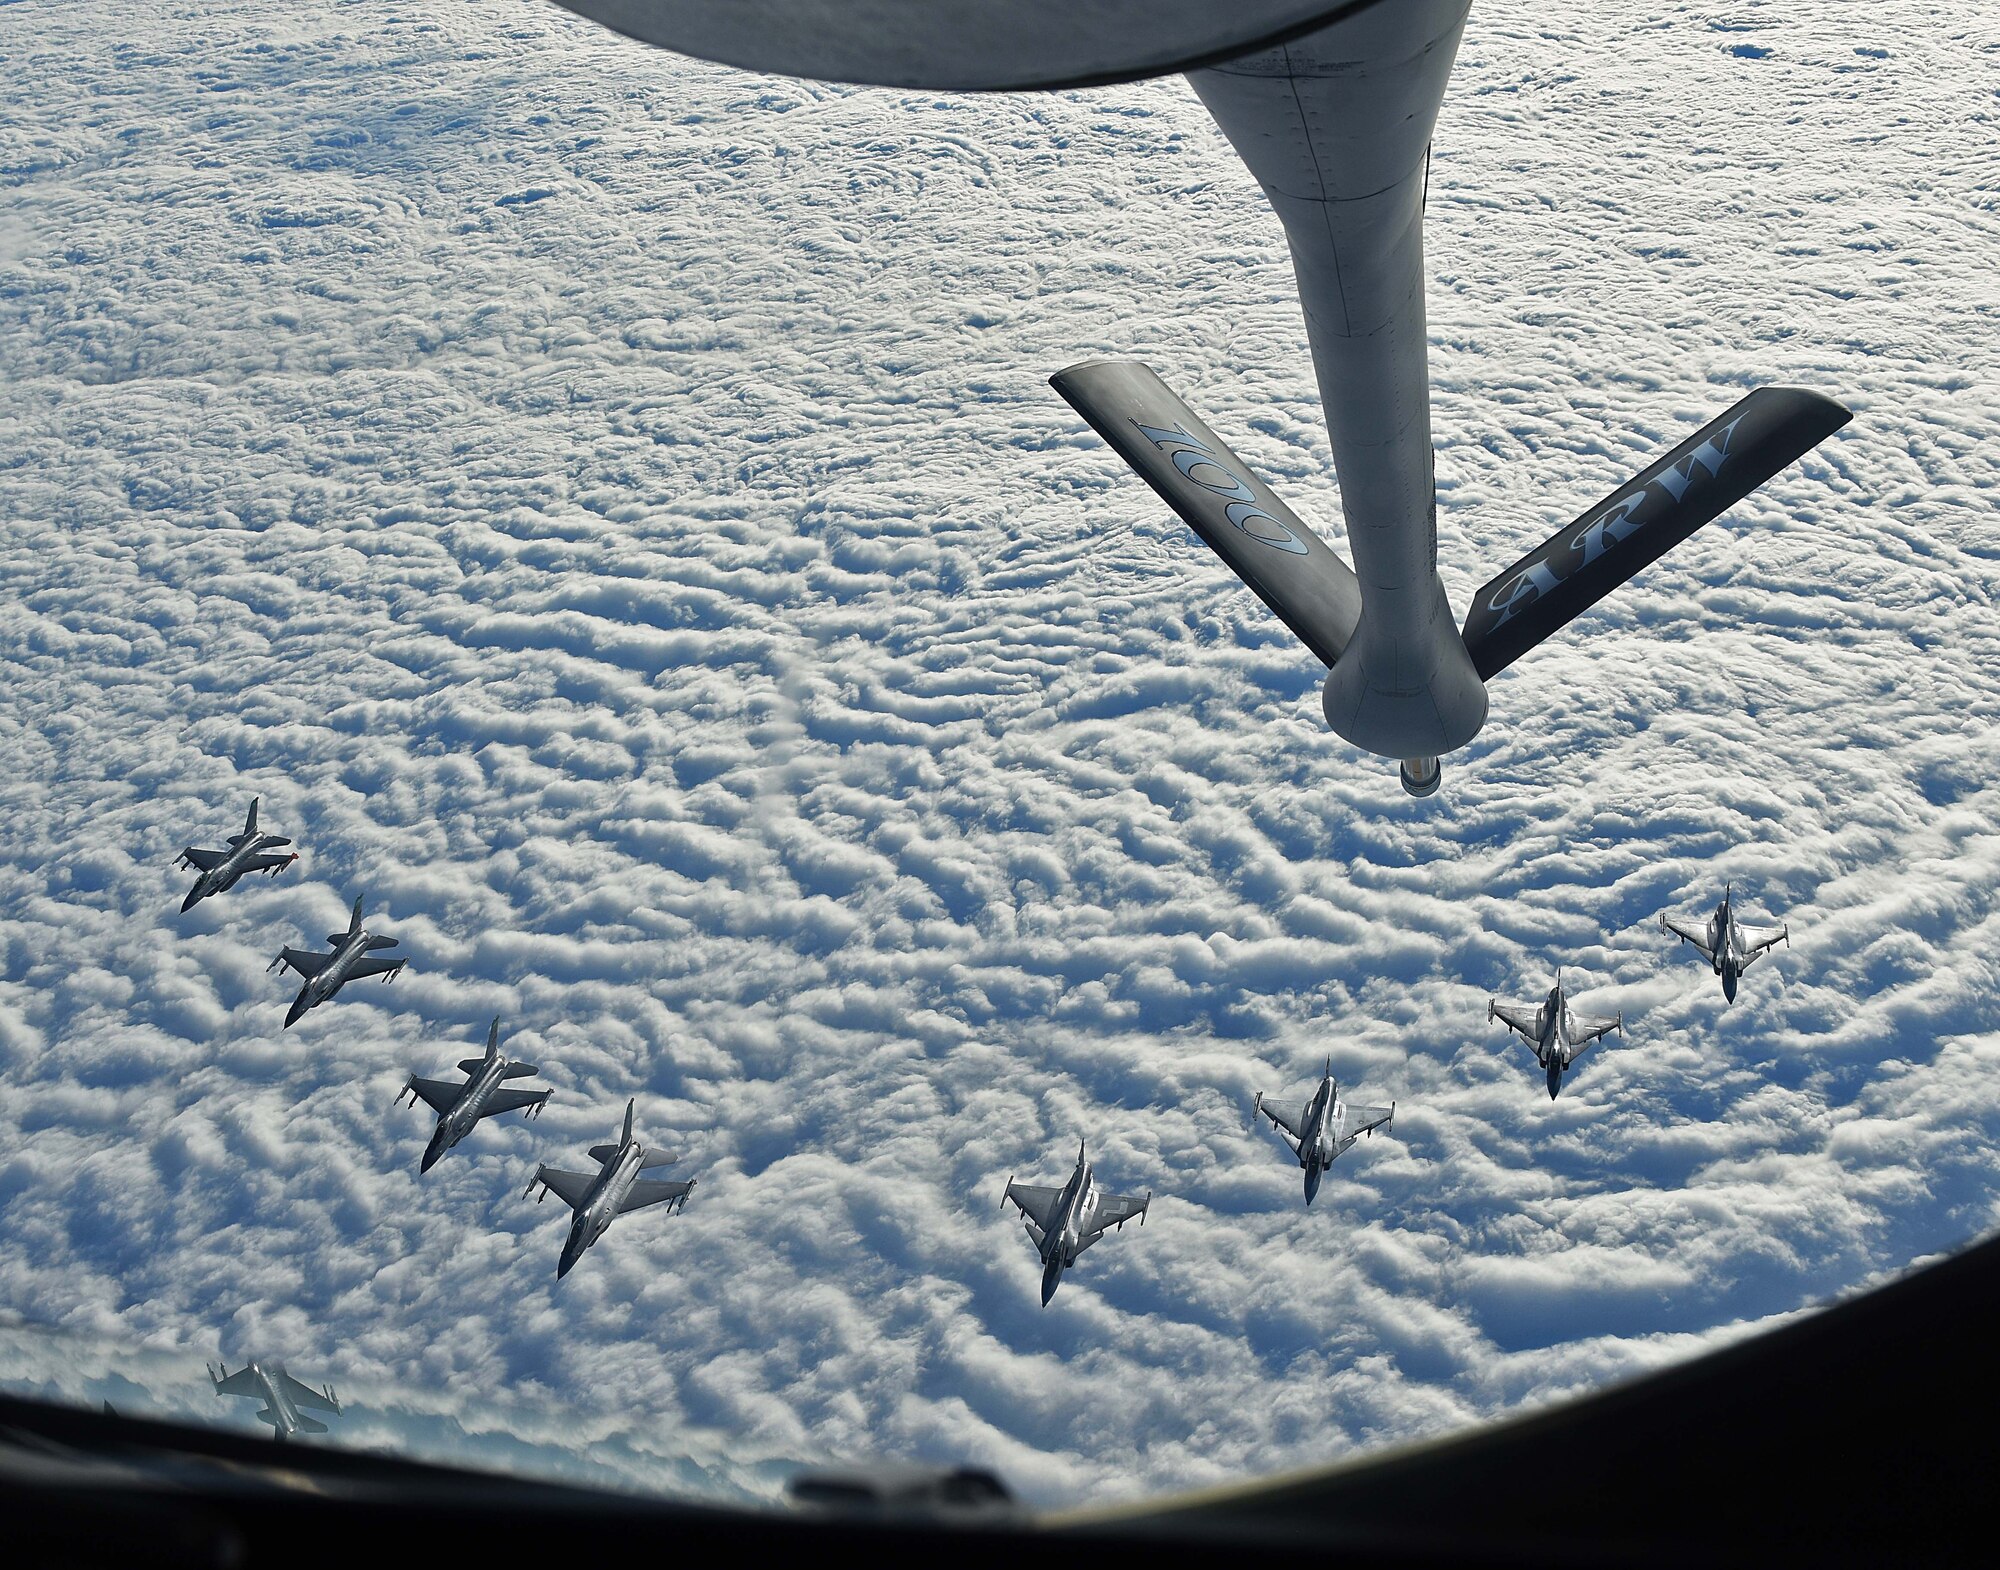 Four U.S. Air Force F-16C Fighting Falcons and four Swedish Air Force JAS 39 Gripens fly in formation together behind a U.S. Air Force KC-135 Stratotanker during aerial refueling training in Swedish airspace, Feb. 8, 2018. The air refueling training is in conjunction with a rotational deployment of F-16Cs from the Ohio Air National Guard’s 180th Fighter Wing to Amari Air Base, Estonia, as part of a Theater Security Package. The training allows the U.S. and Sweden to strengthen interoperability and increase readiness.  (U.S. Air Force photo by Airman 1st Class Luke Milano)